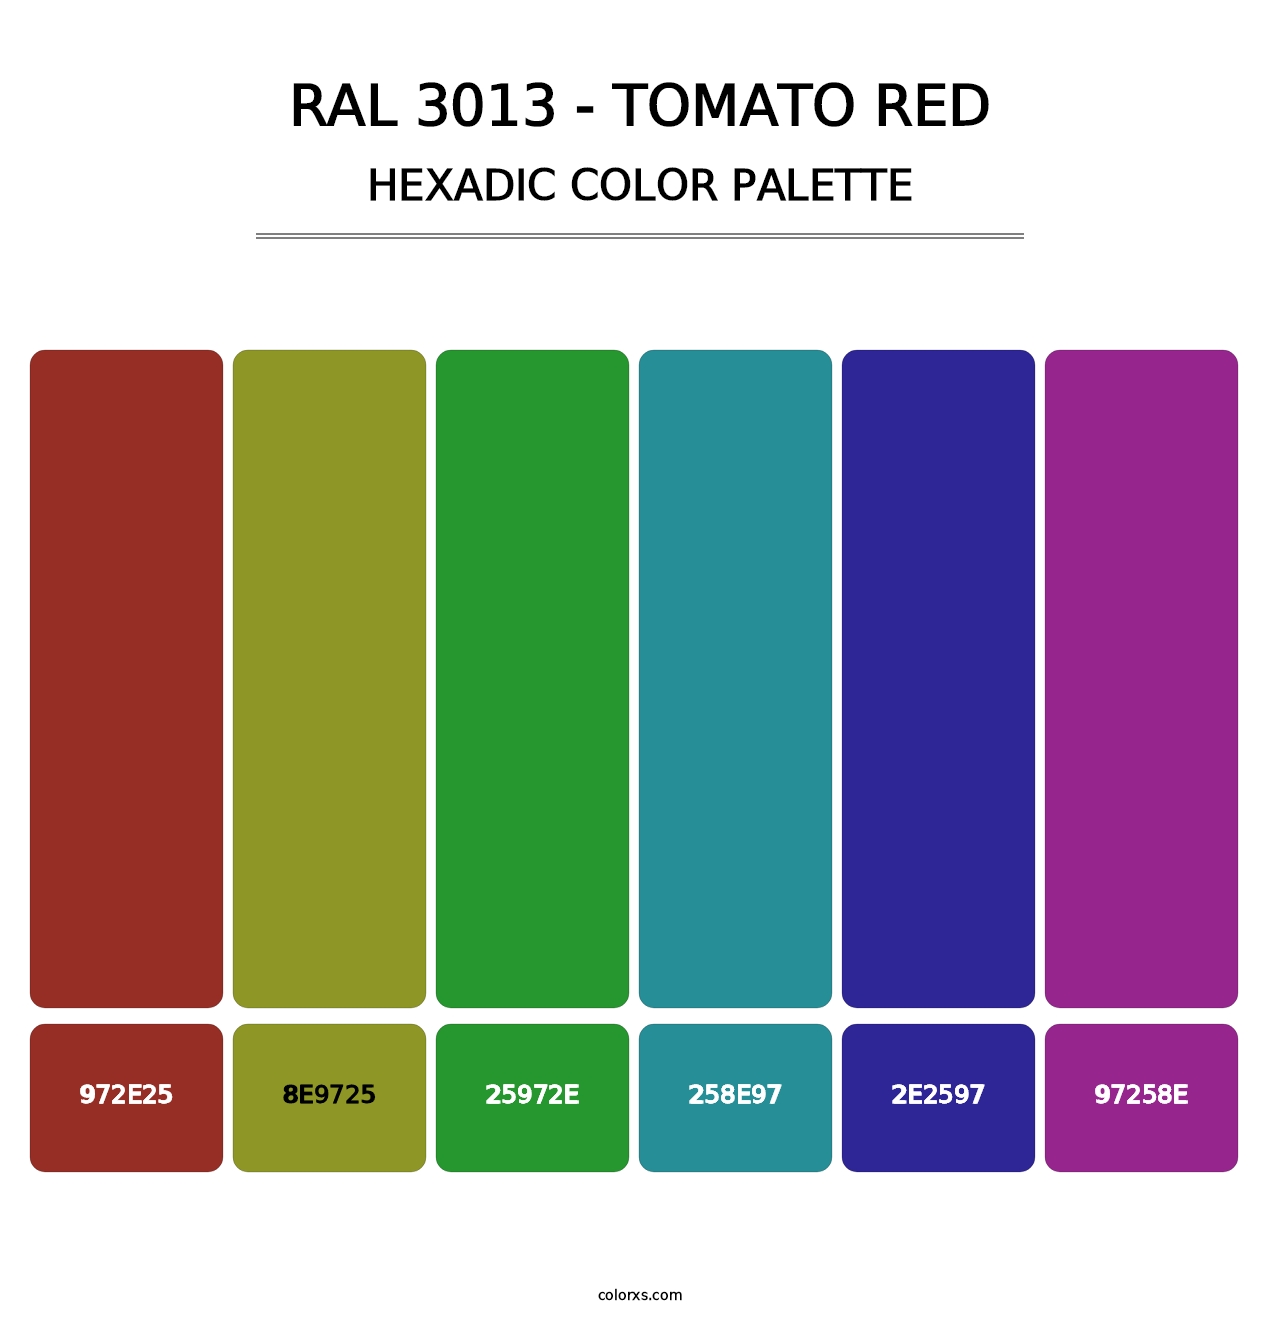 RAL 3013 - Tomato Red - Hexadic Color Palette